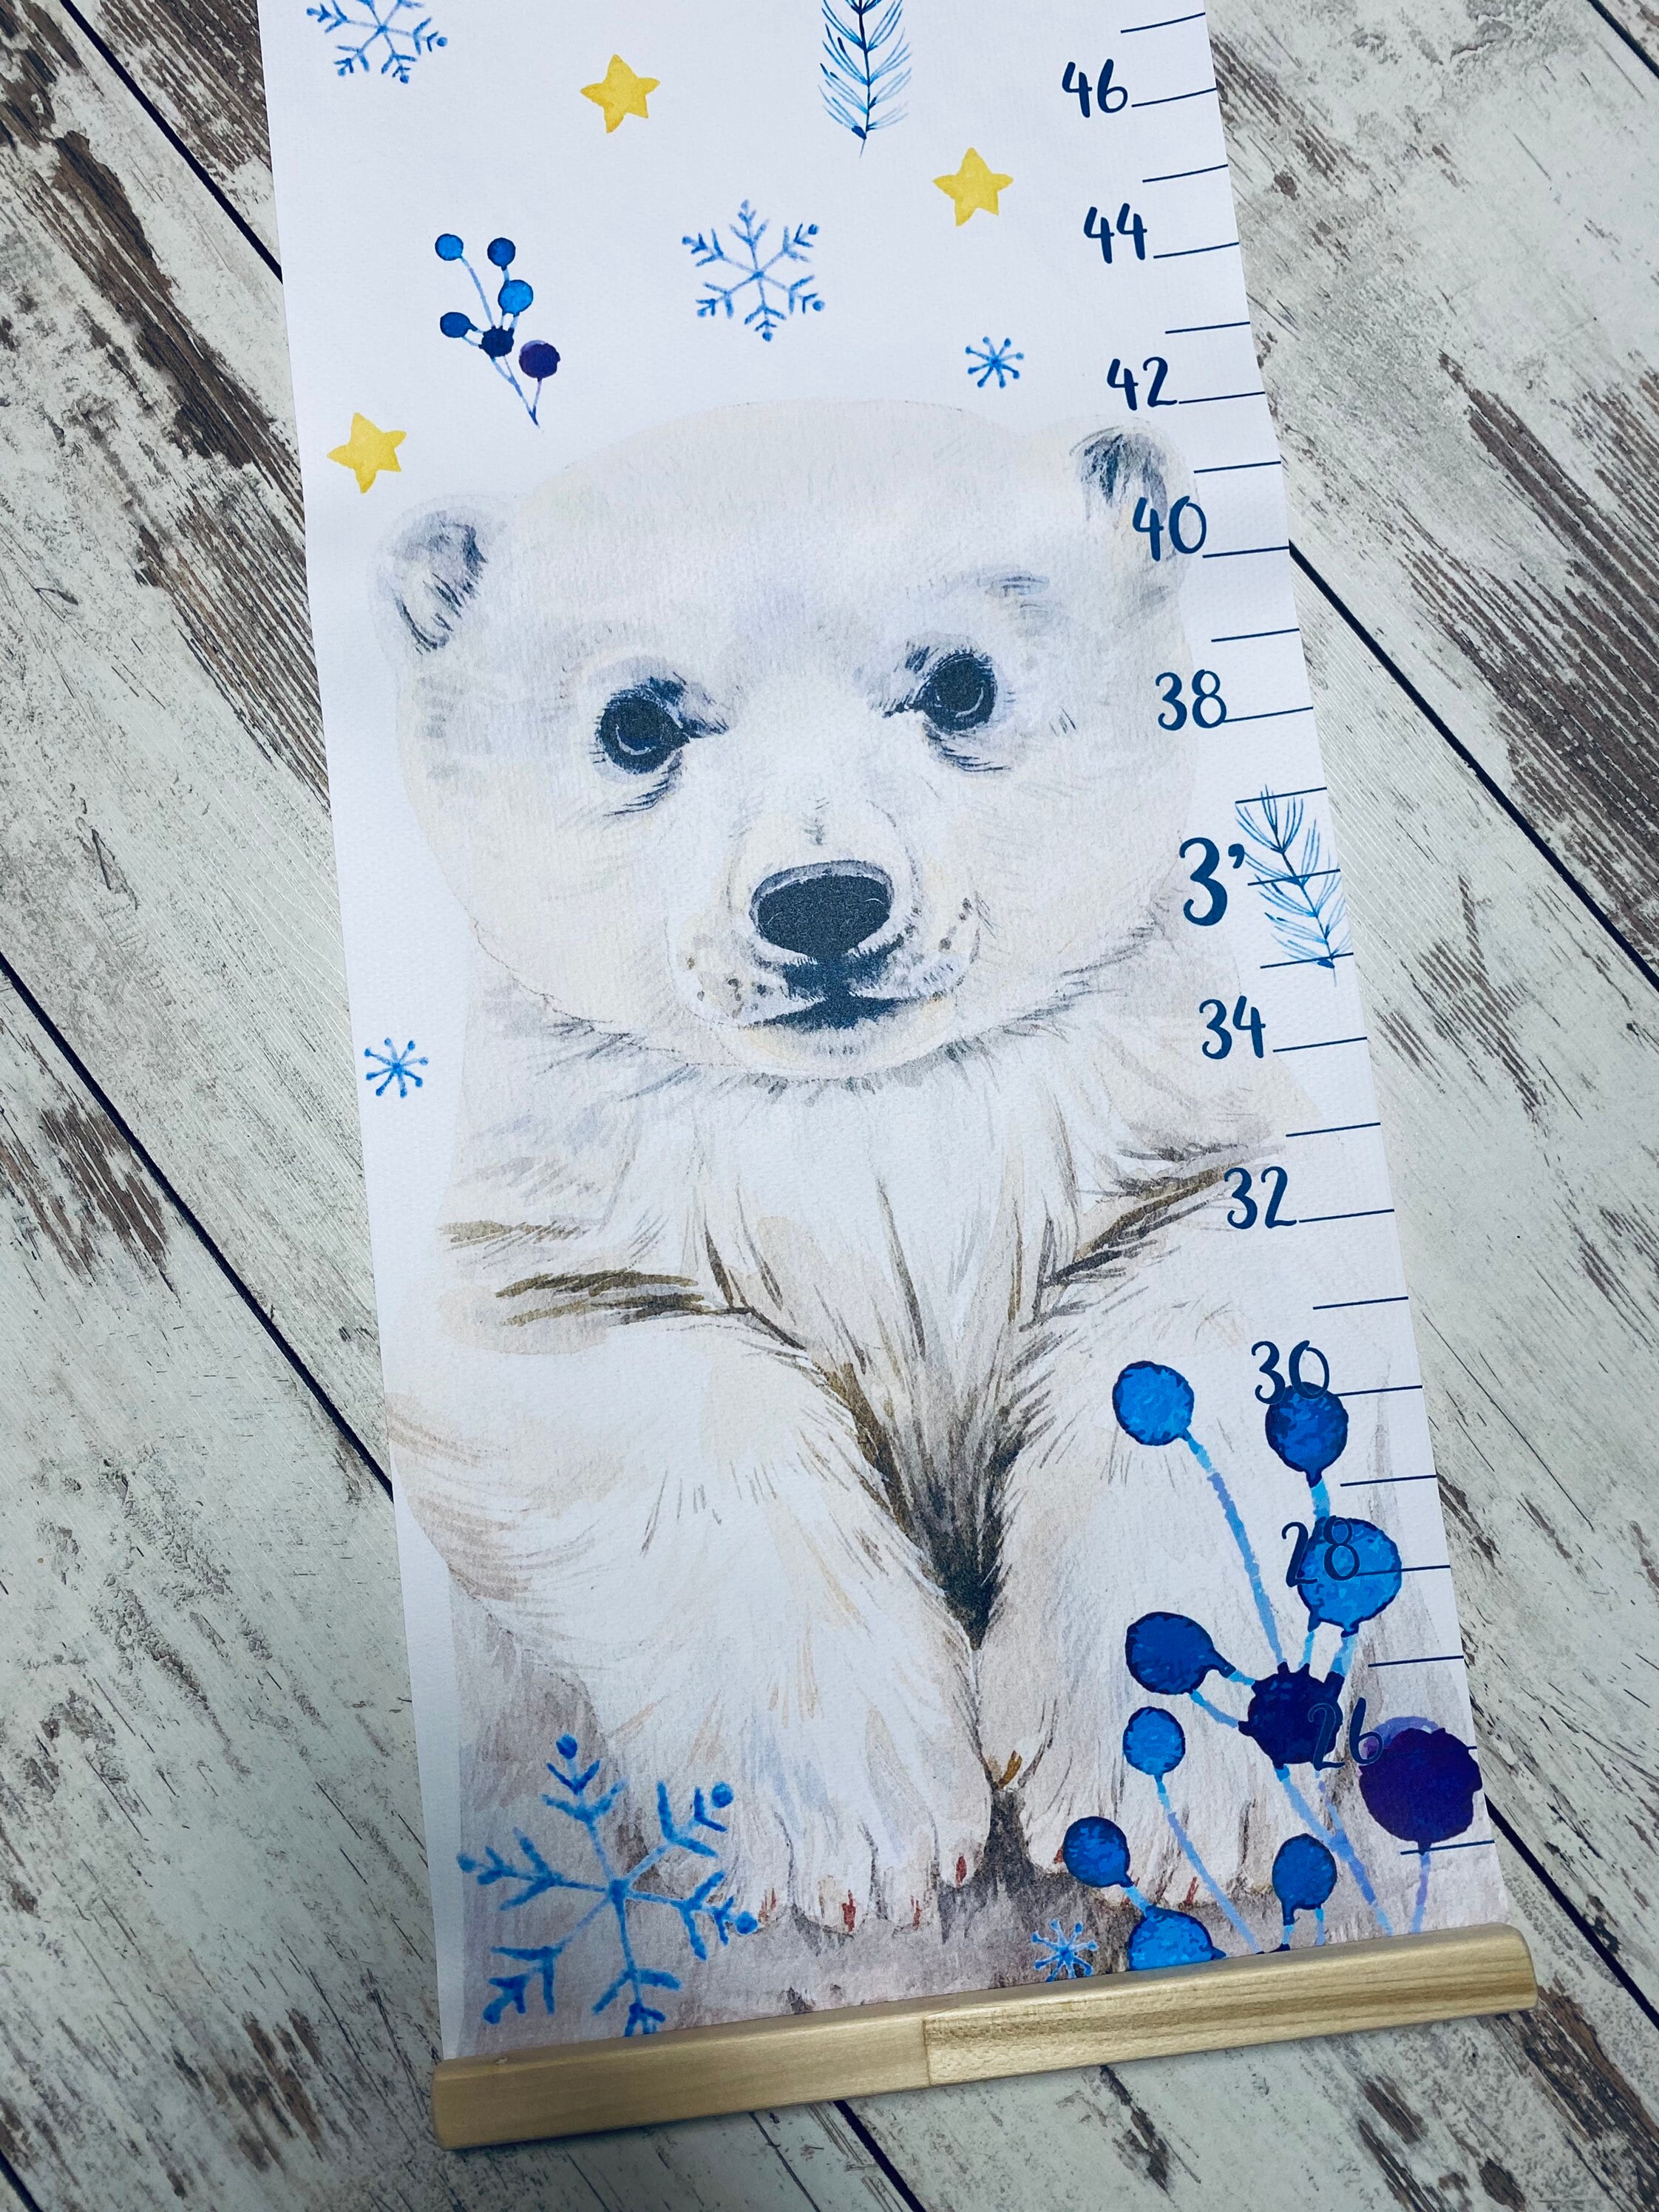 Polar Bear Painting By Numbers Kit Animal Design Canvas House Display  Decoration